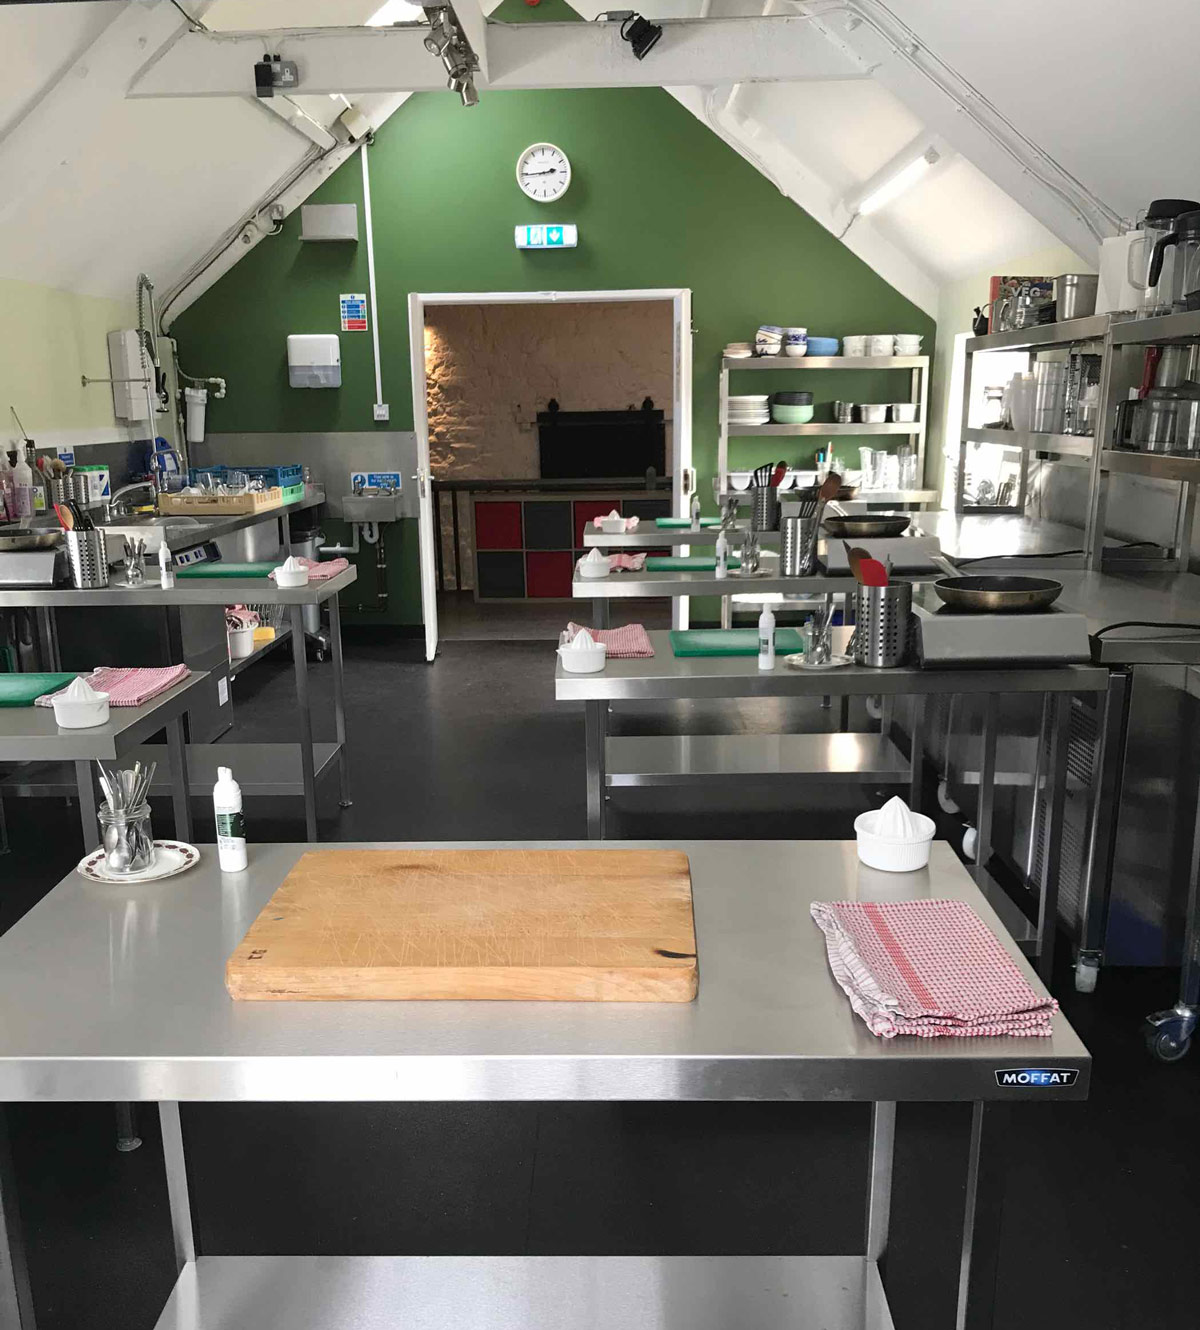 Natural Cookery School kitchen view from Erin's work station, with socially-distanced work spaces